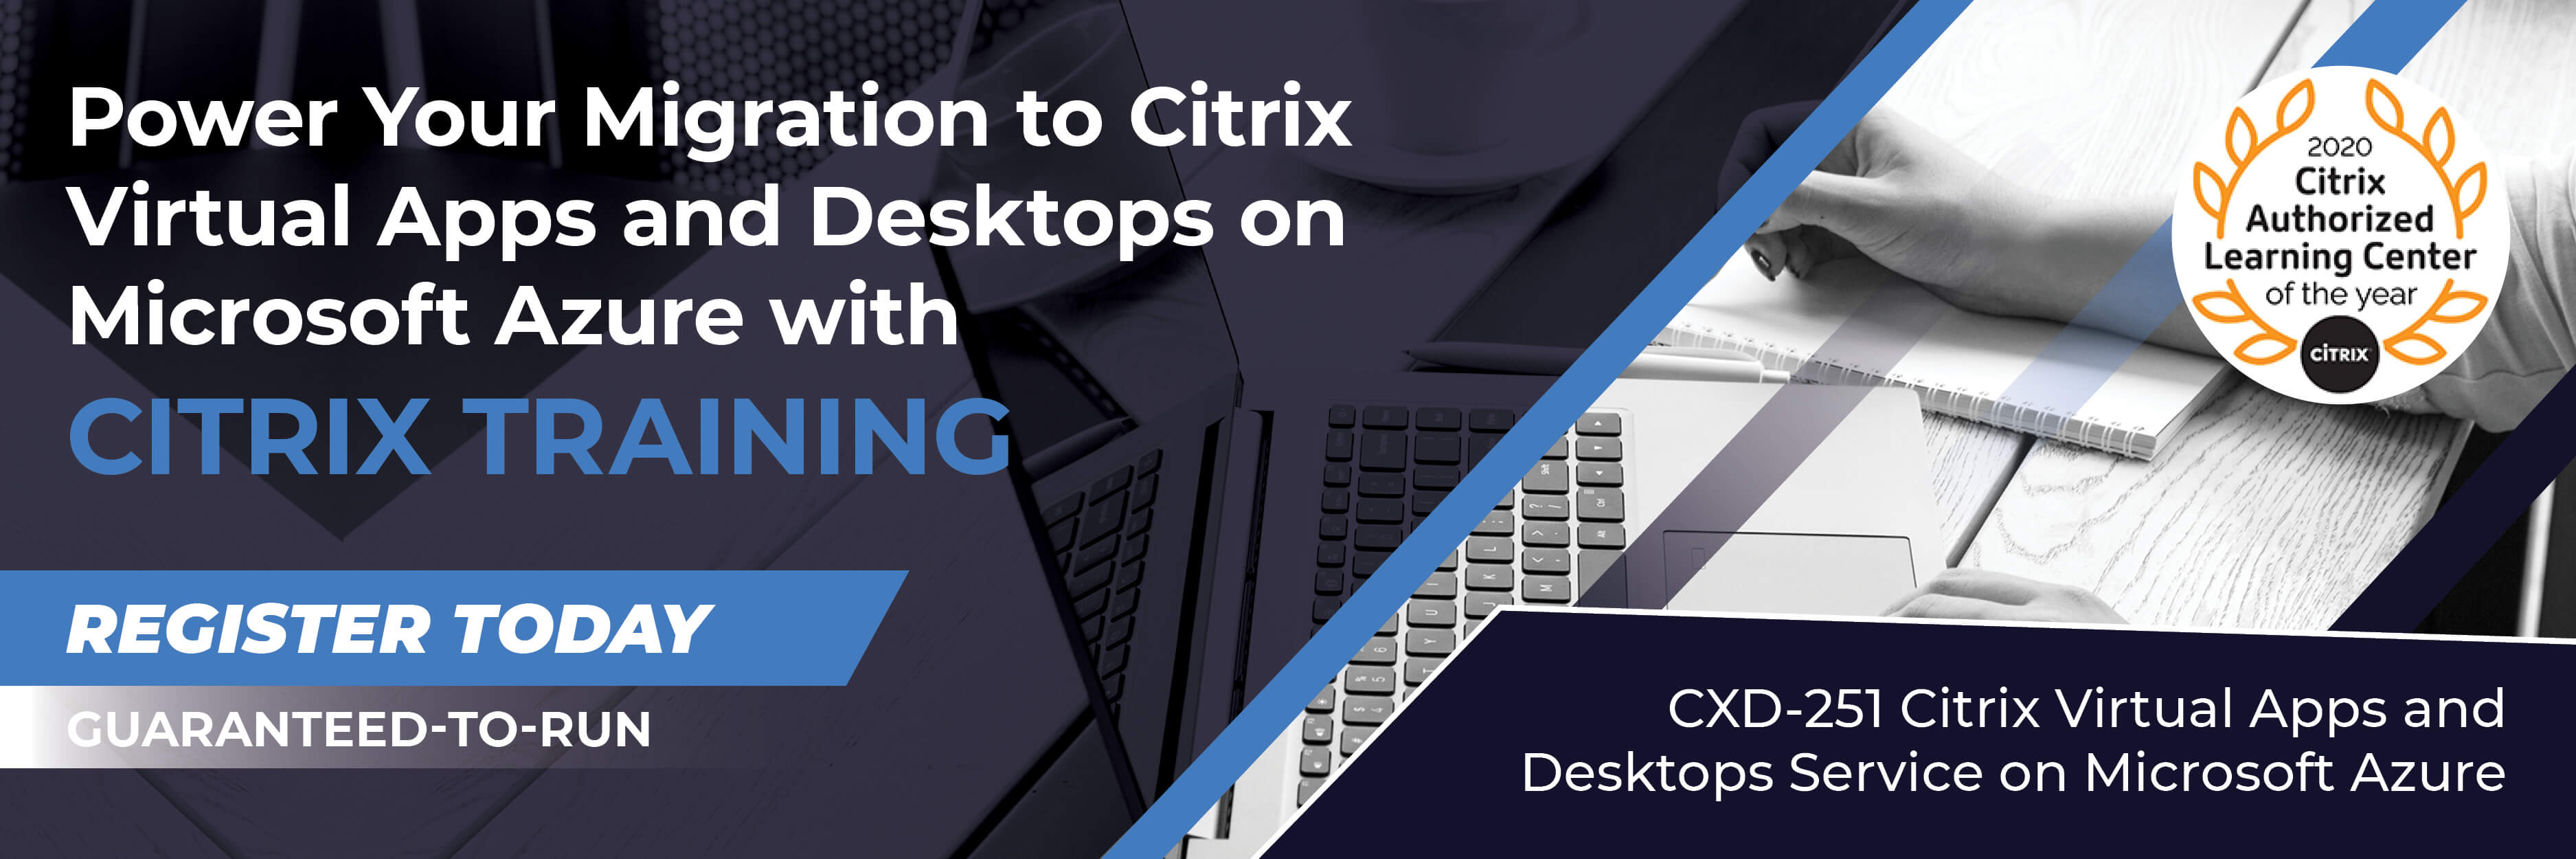 Citrix Training Power Your Migration to Citrix Virtual Apps and Desktops on Microsoft Azure_Blog